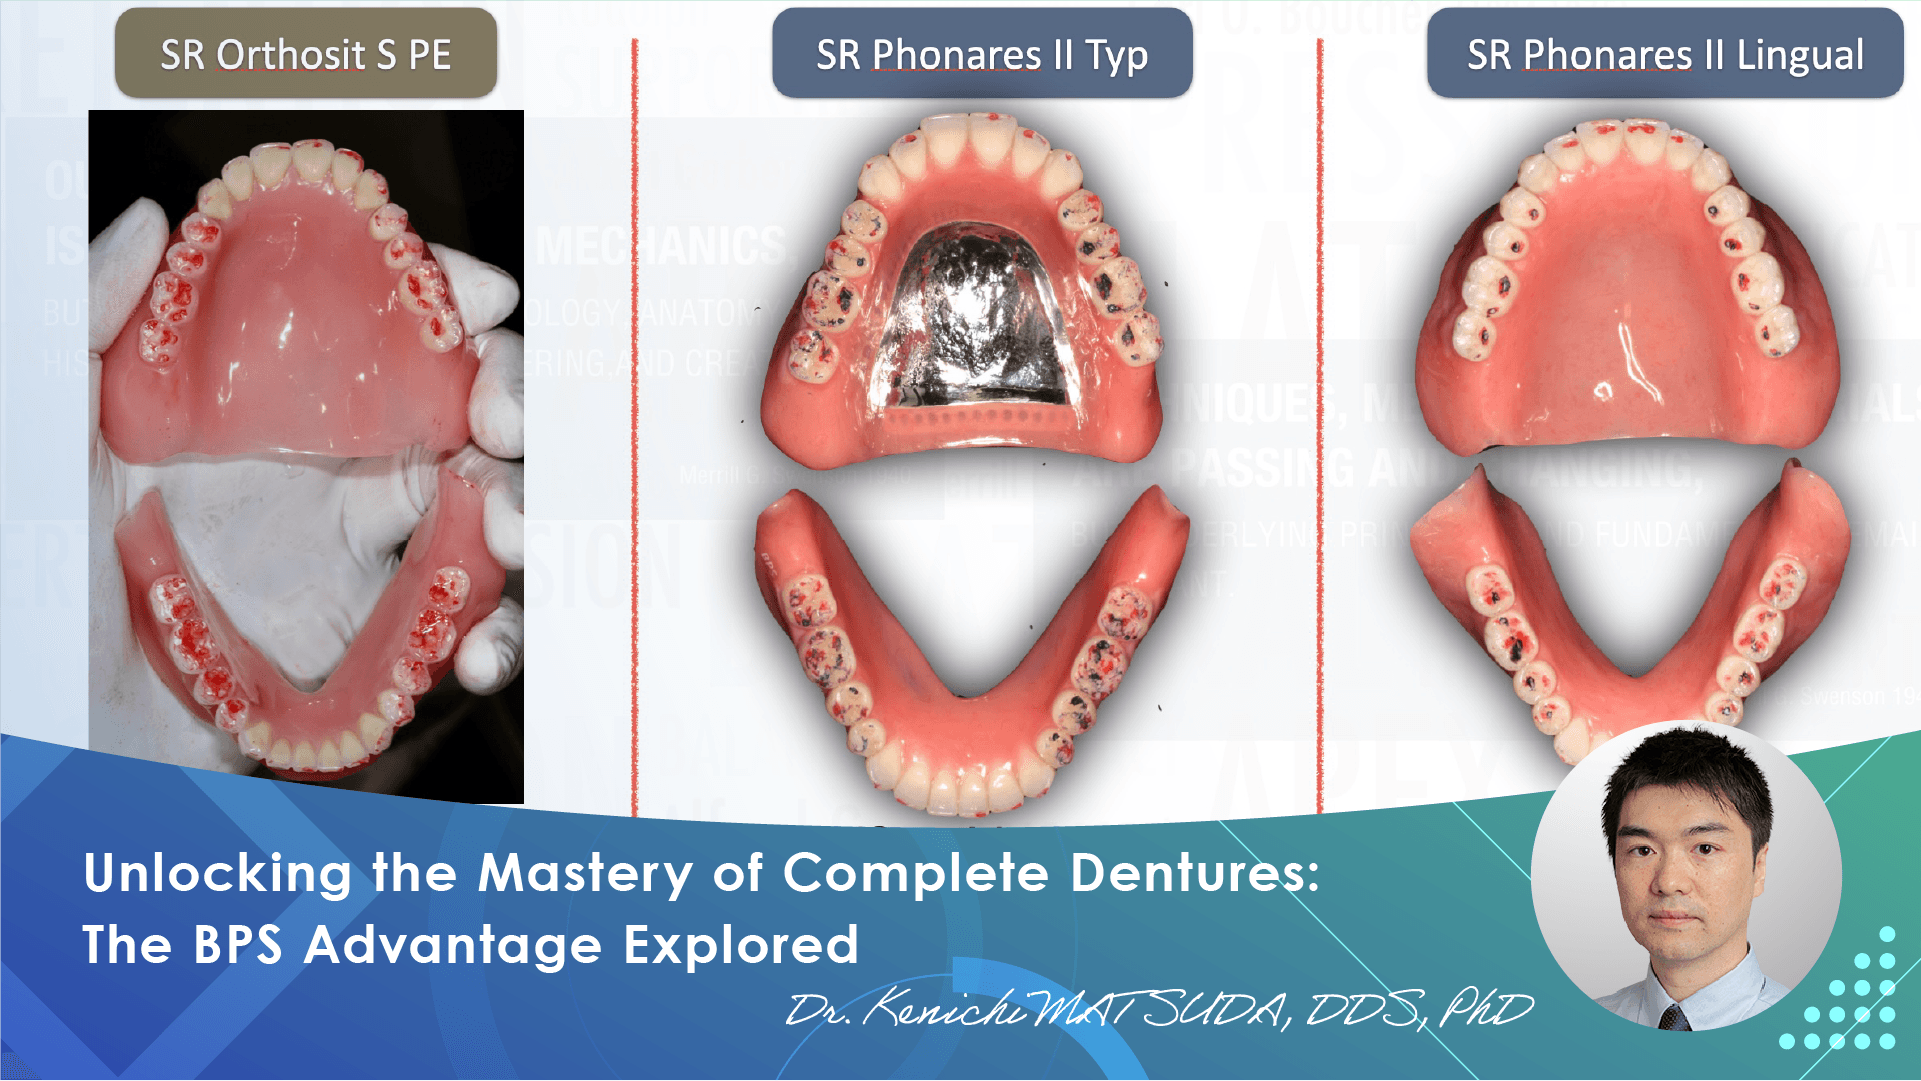 Unlocking the Mastery of Complete Dentures: The BPS Advantage Explored